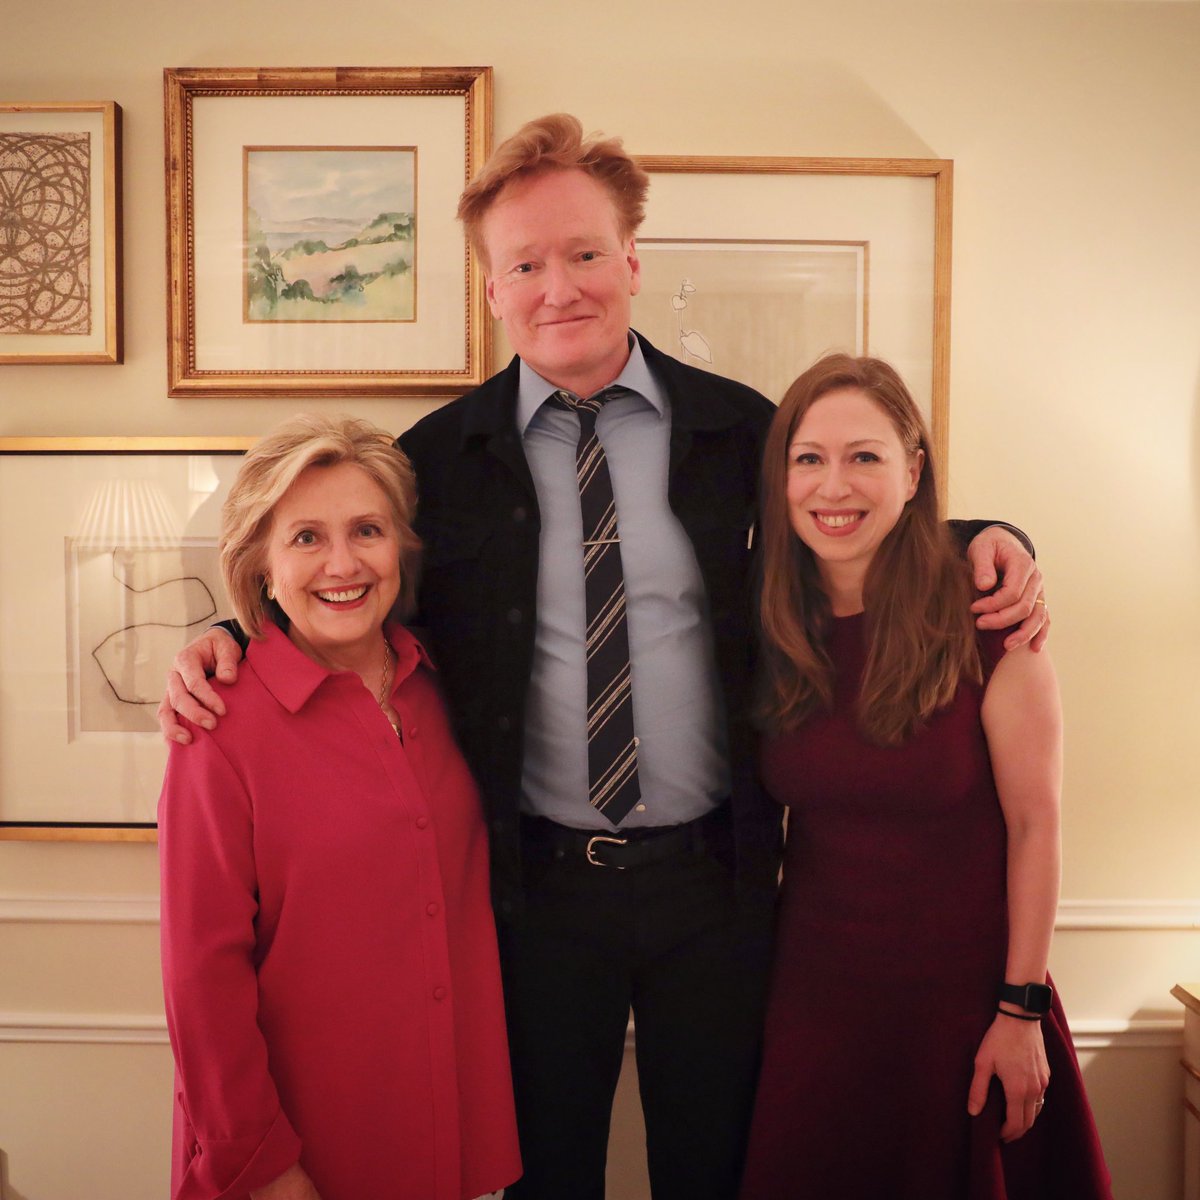 I’m looking forward to playing a game of half-court basketball with my new friend @HillaryClinton. apple.co/TeamCoco #GutsyWomen